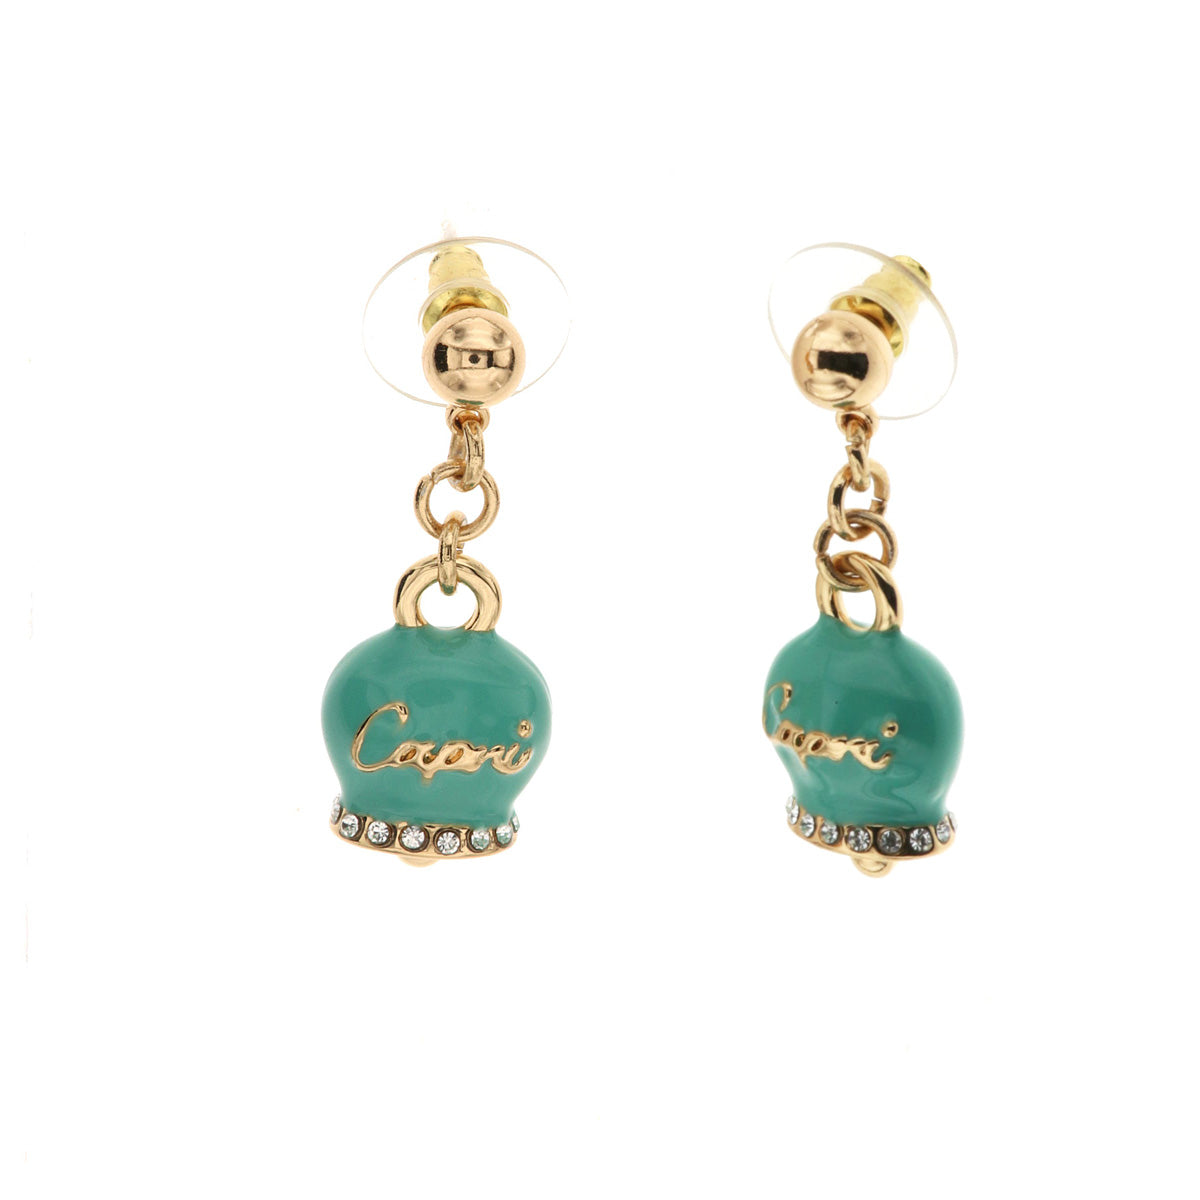 Metal earrings with campering bell pendant in water green enamel, embellished with crystals